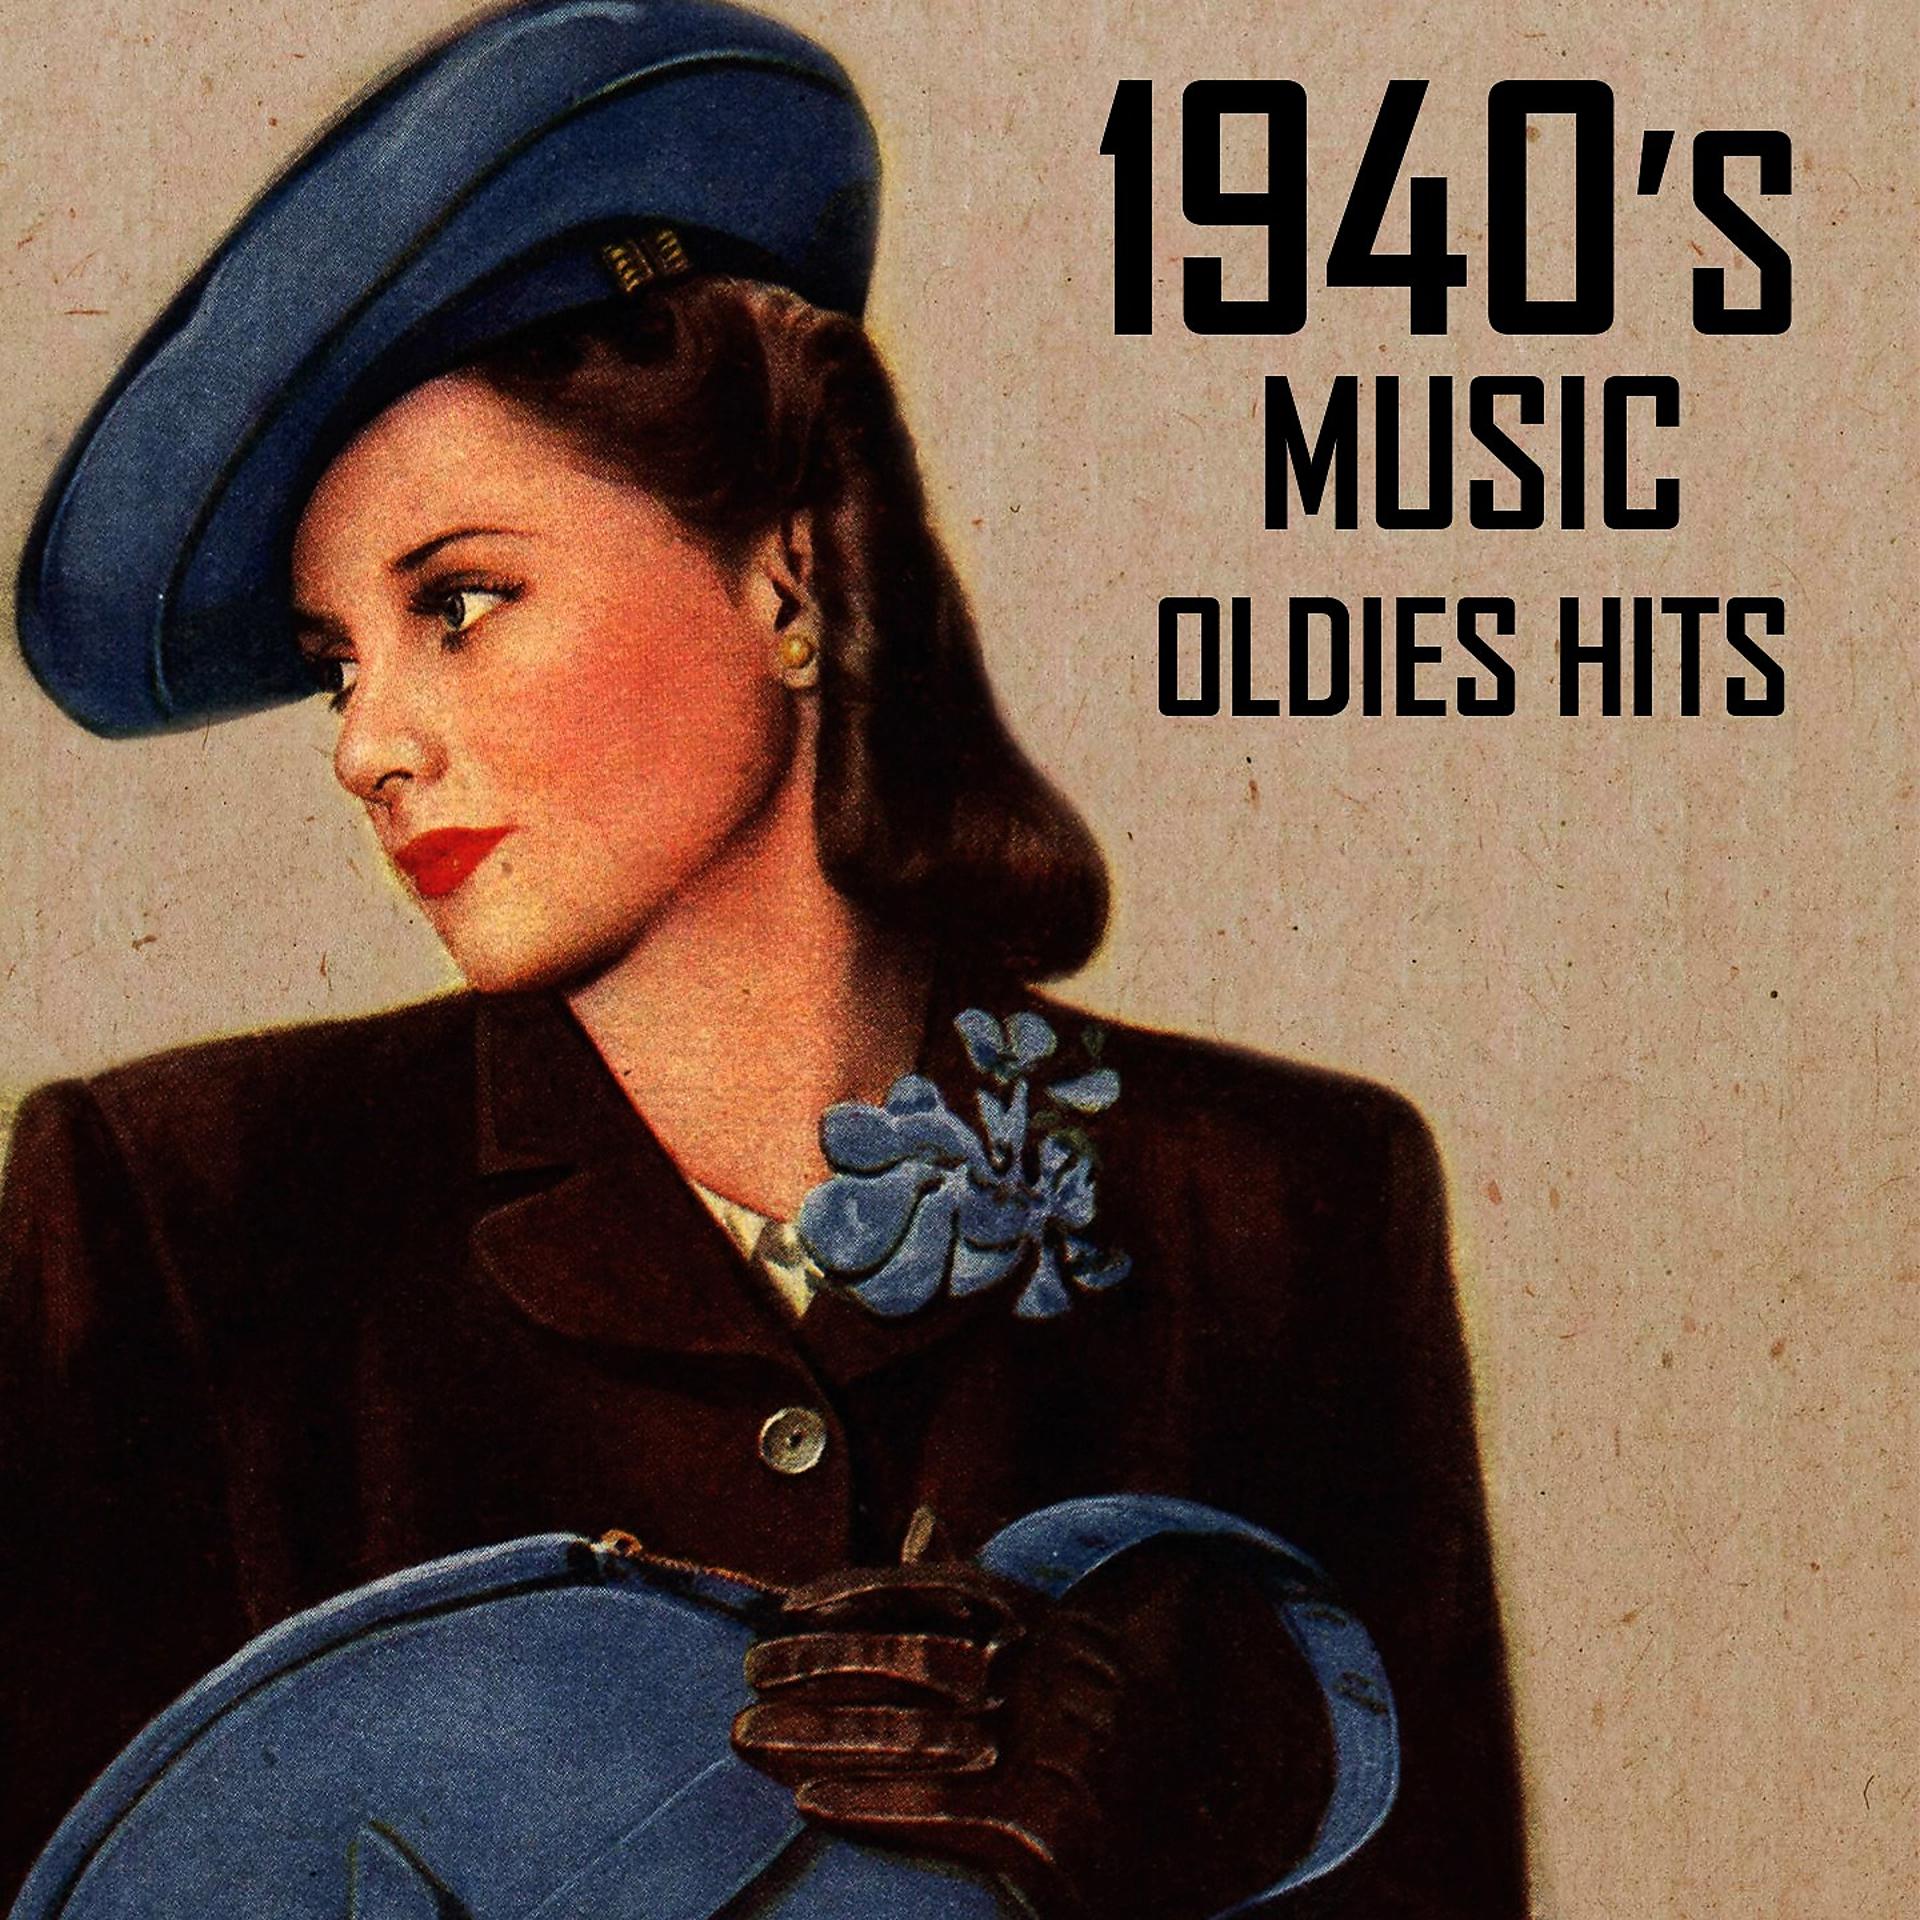 Постер к треку Artie Shaw, Helen Forrest, Ella Fitzgerald & Her Famous Orchestra, The Andrews Sisters, Dinah Shore, Bing Crosby, Doris Day - 1940's Music Oldies Hits